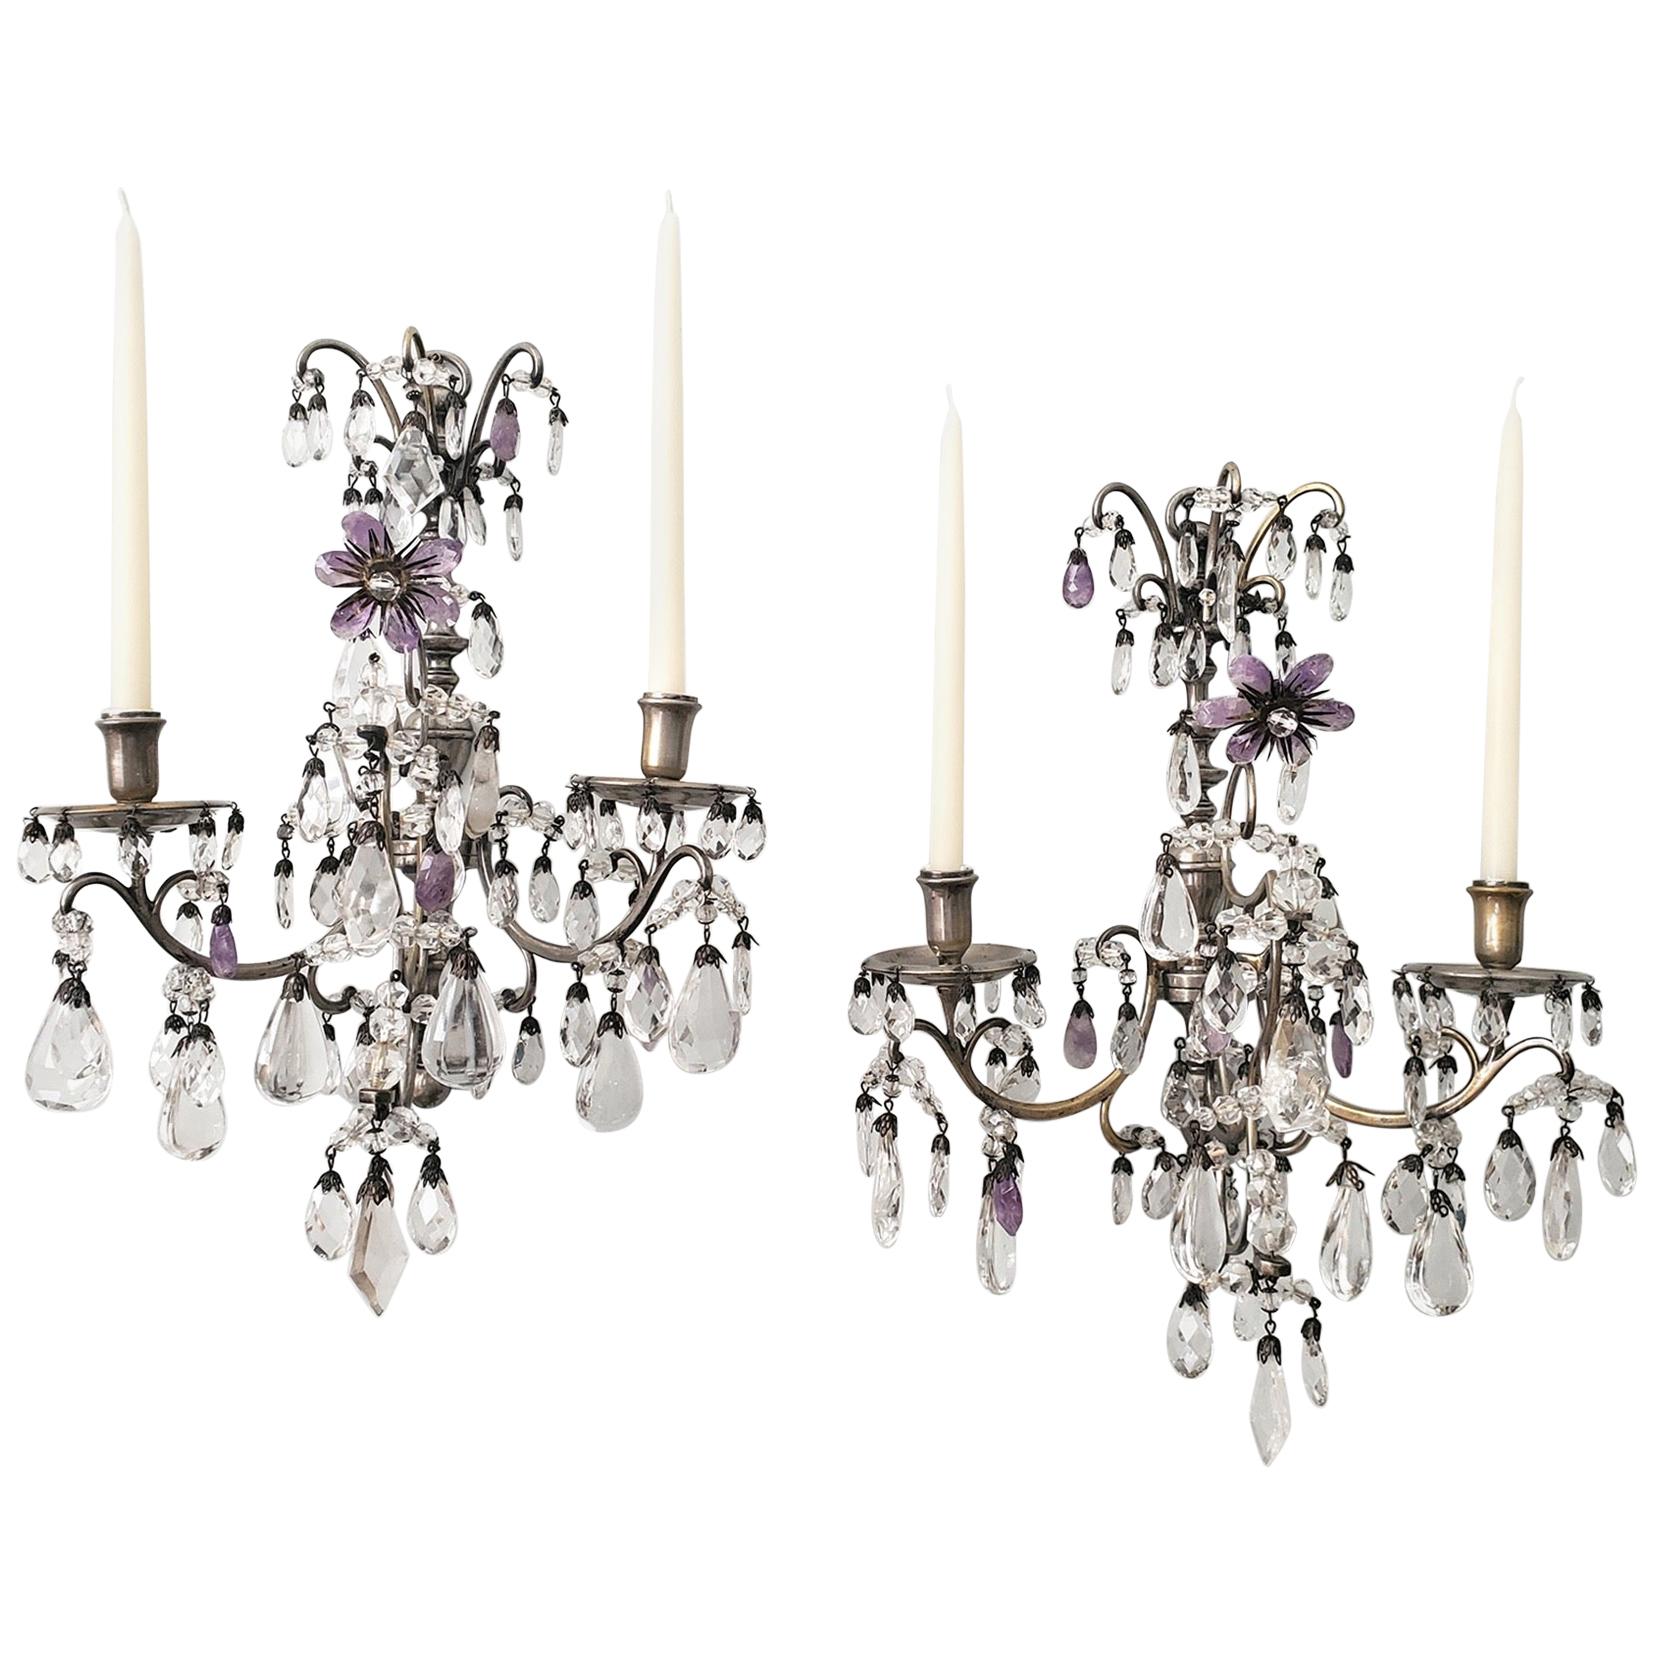 Pair of 1920s Rock-Crystal and Amethyst Sconces